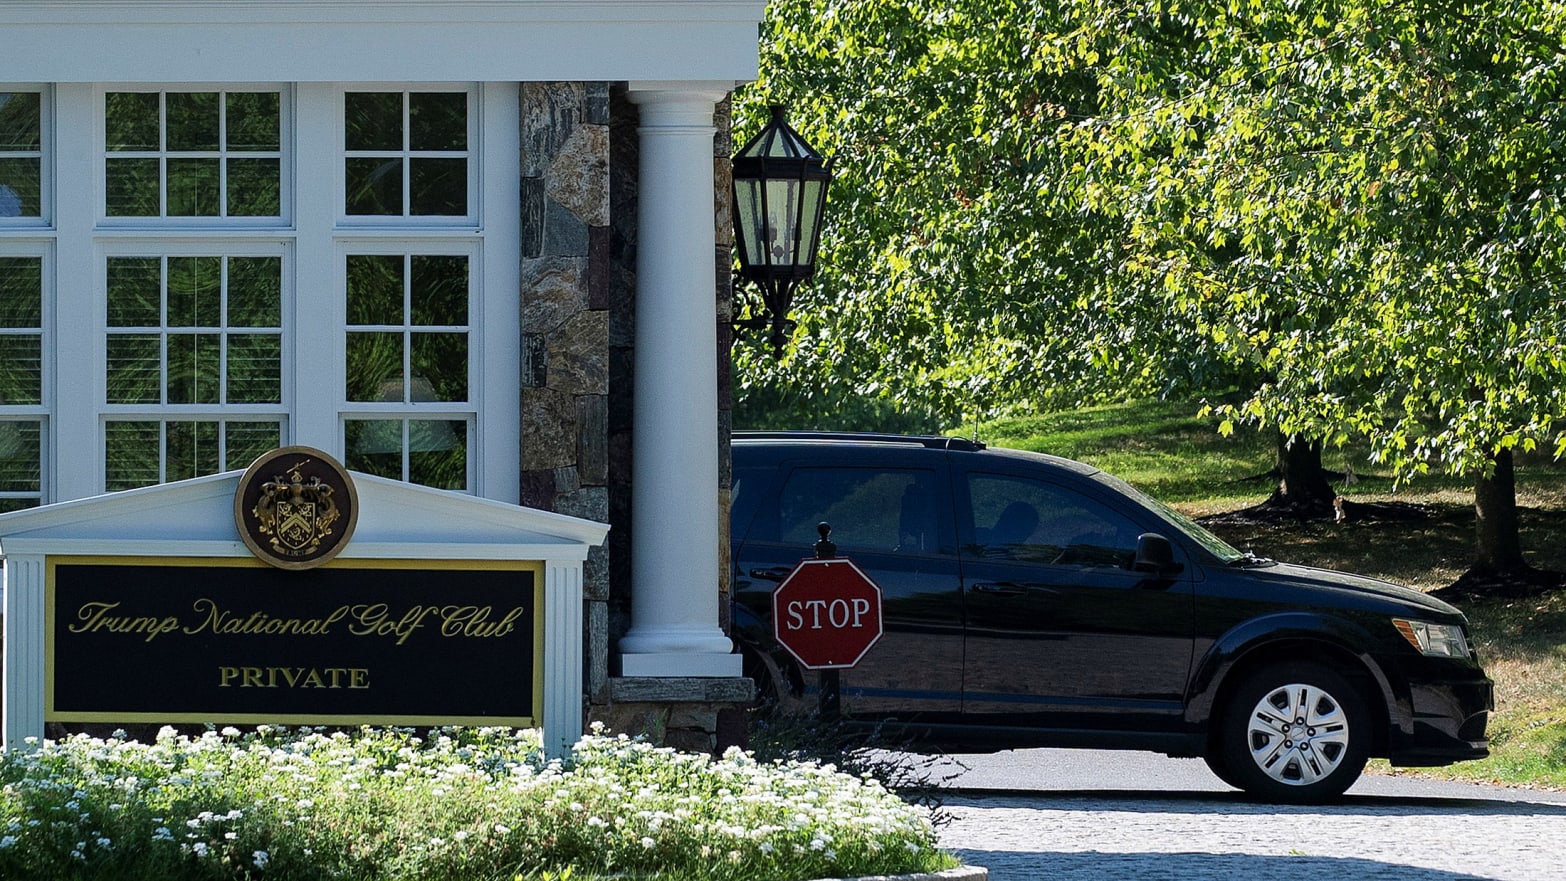 A black car pulls out from behind a sign that says Trump National Golf Club.